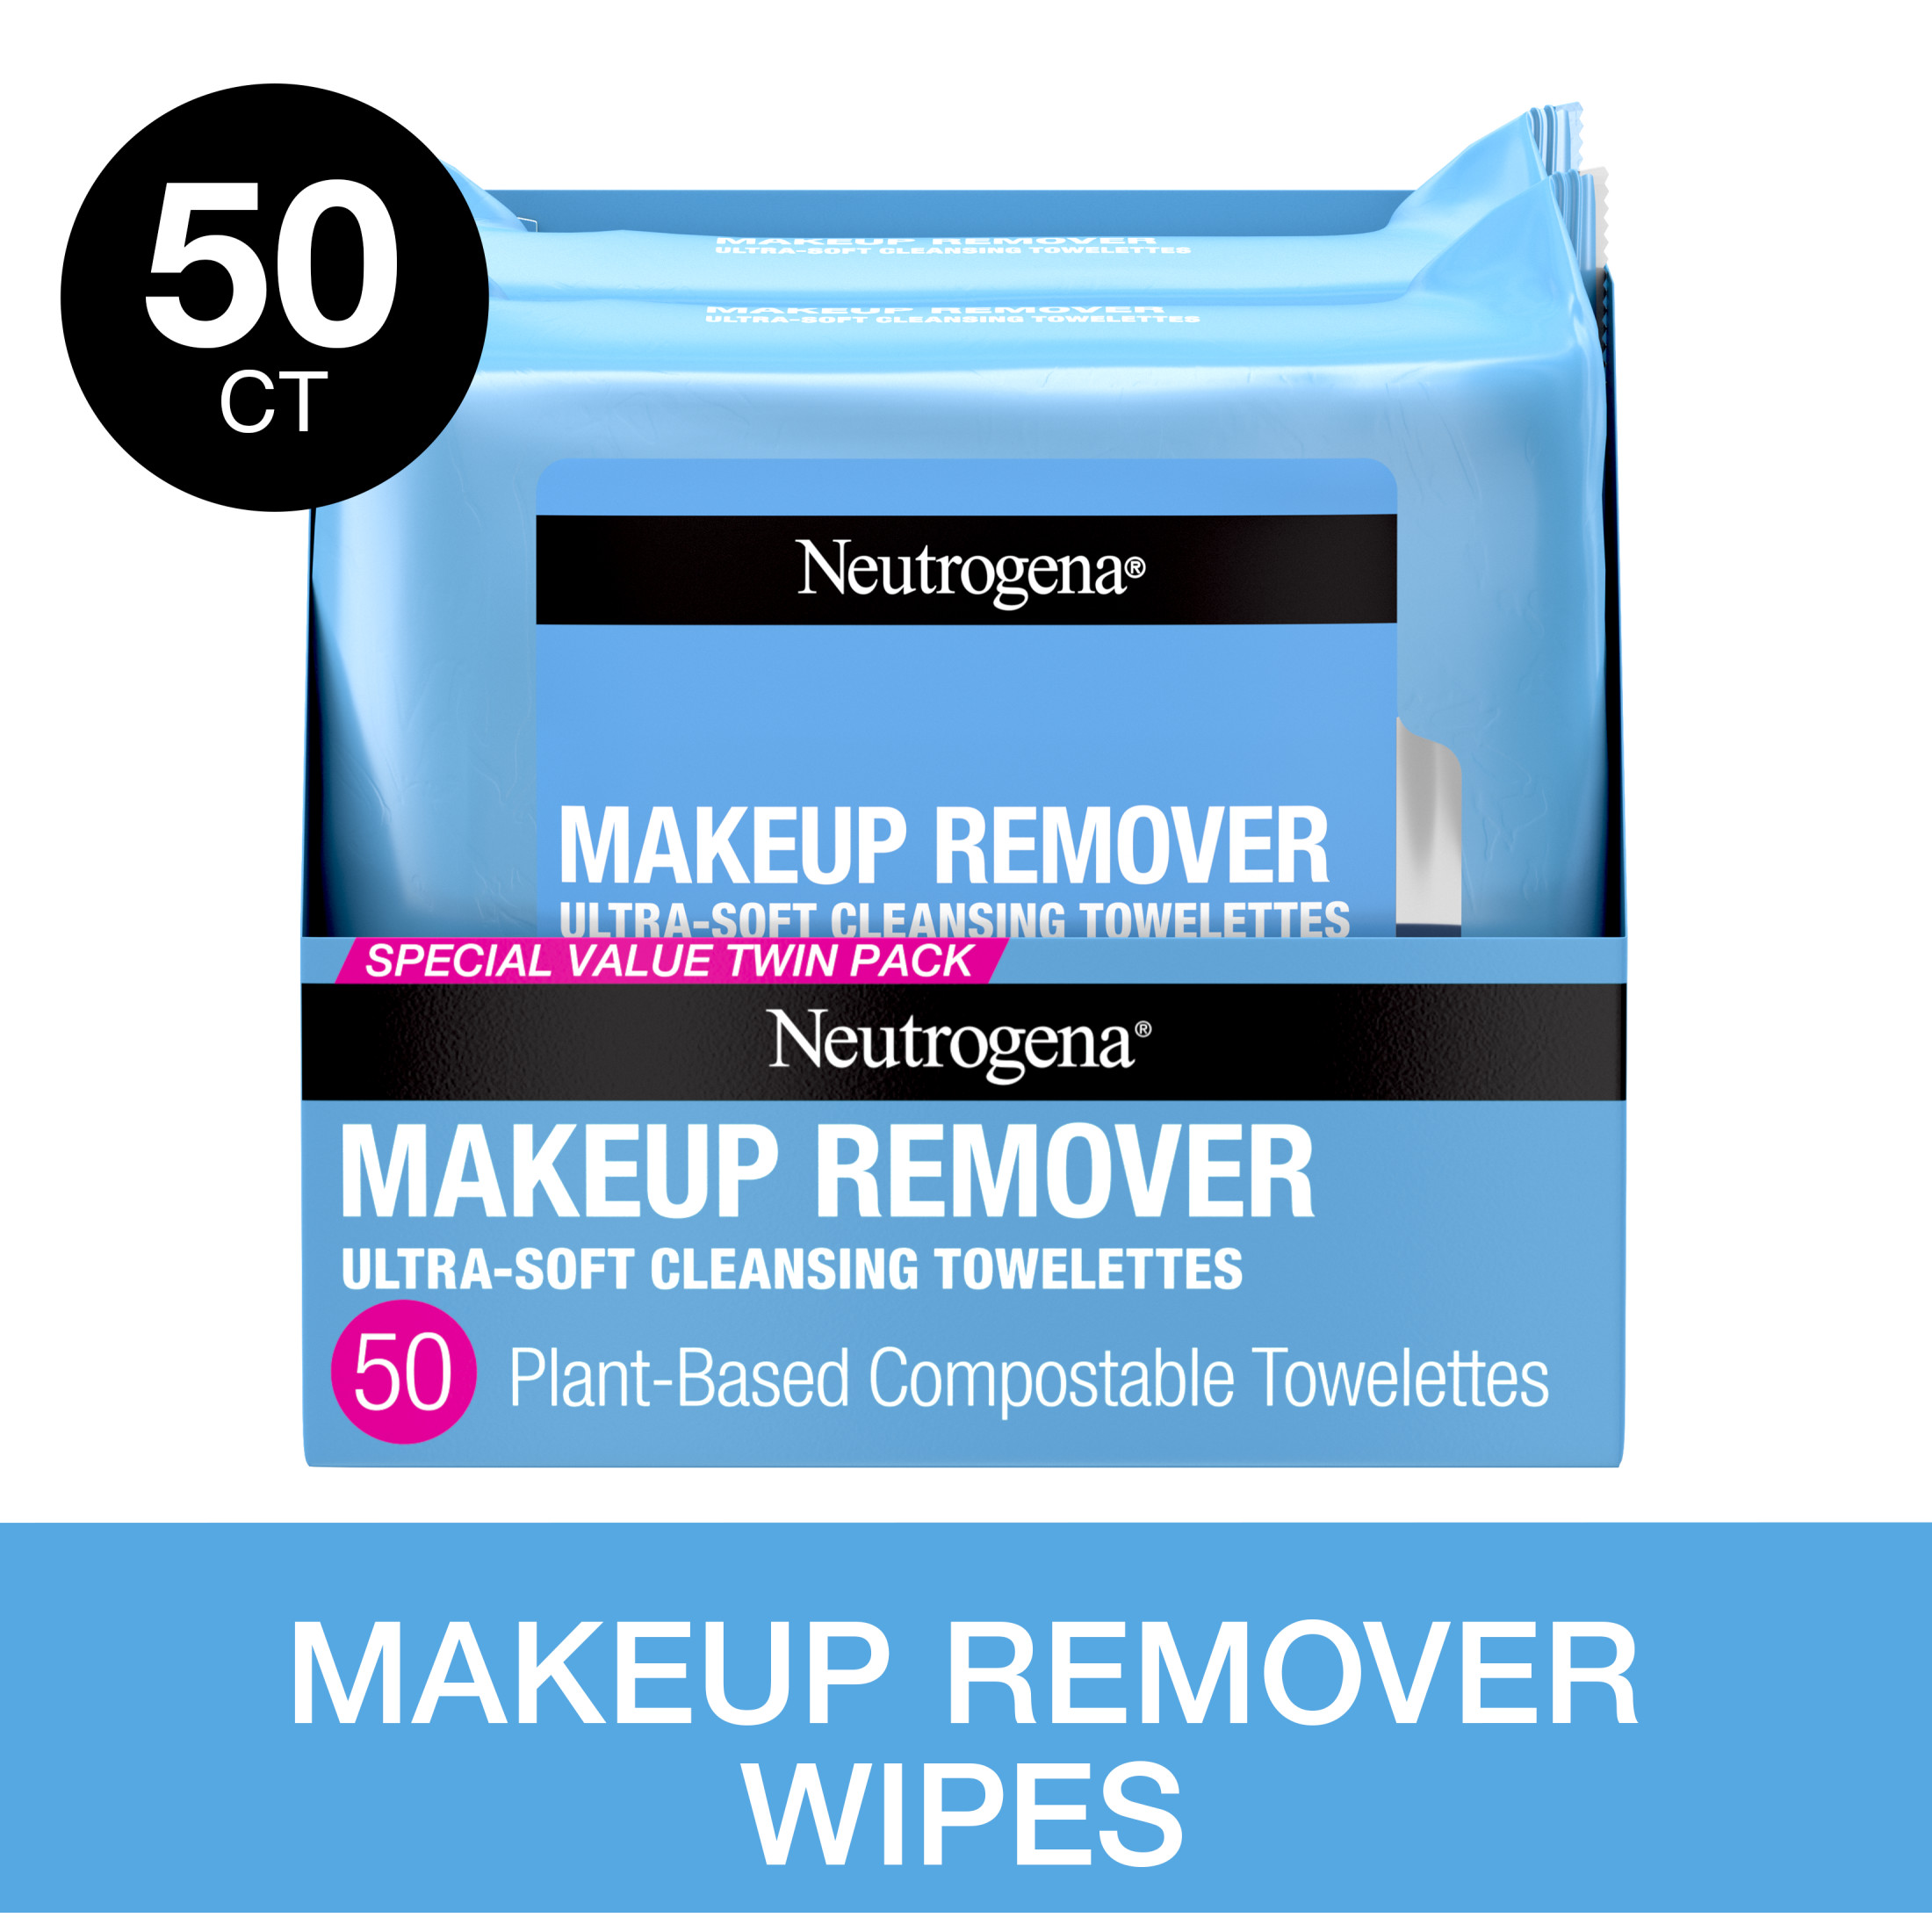 Neutrogena Makeup Remover Wipes and Face Cleansing Towelettes, 25 Count, (2 Pack) - image 1 of 9